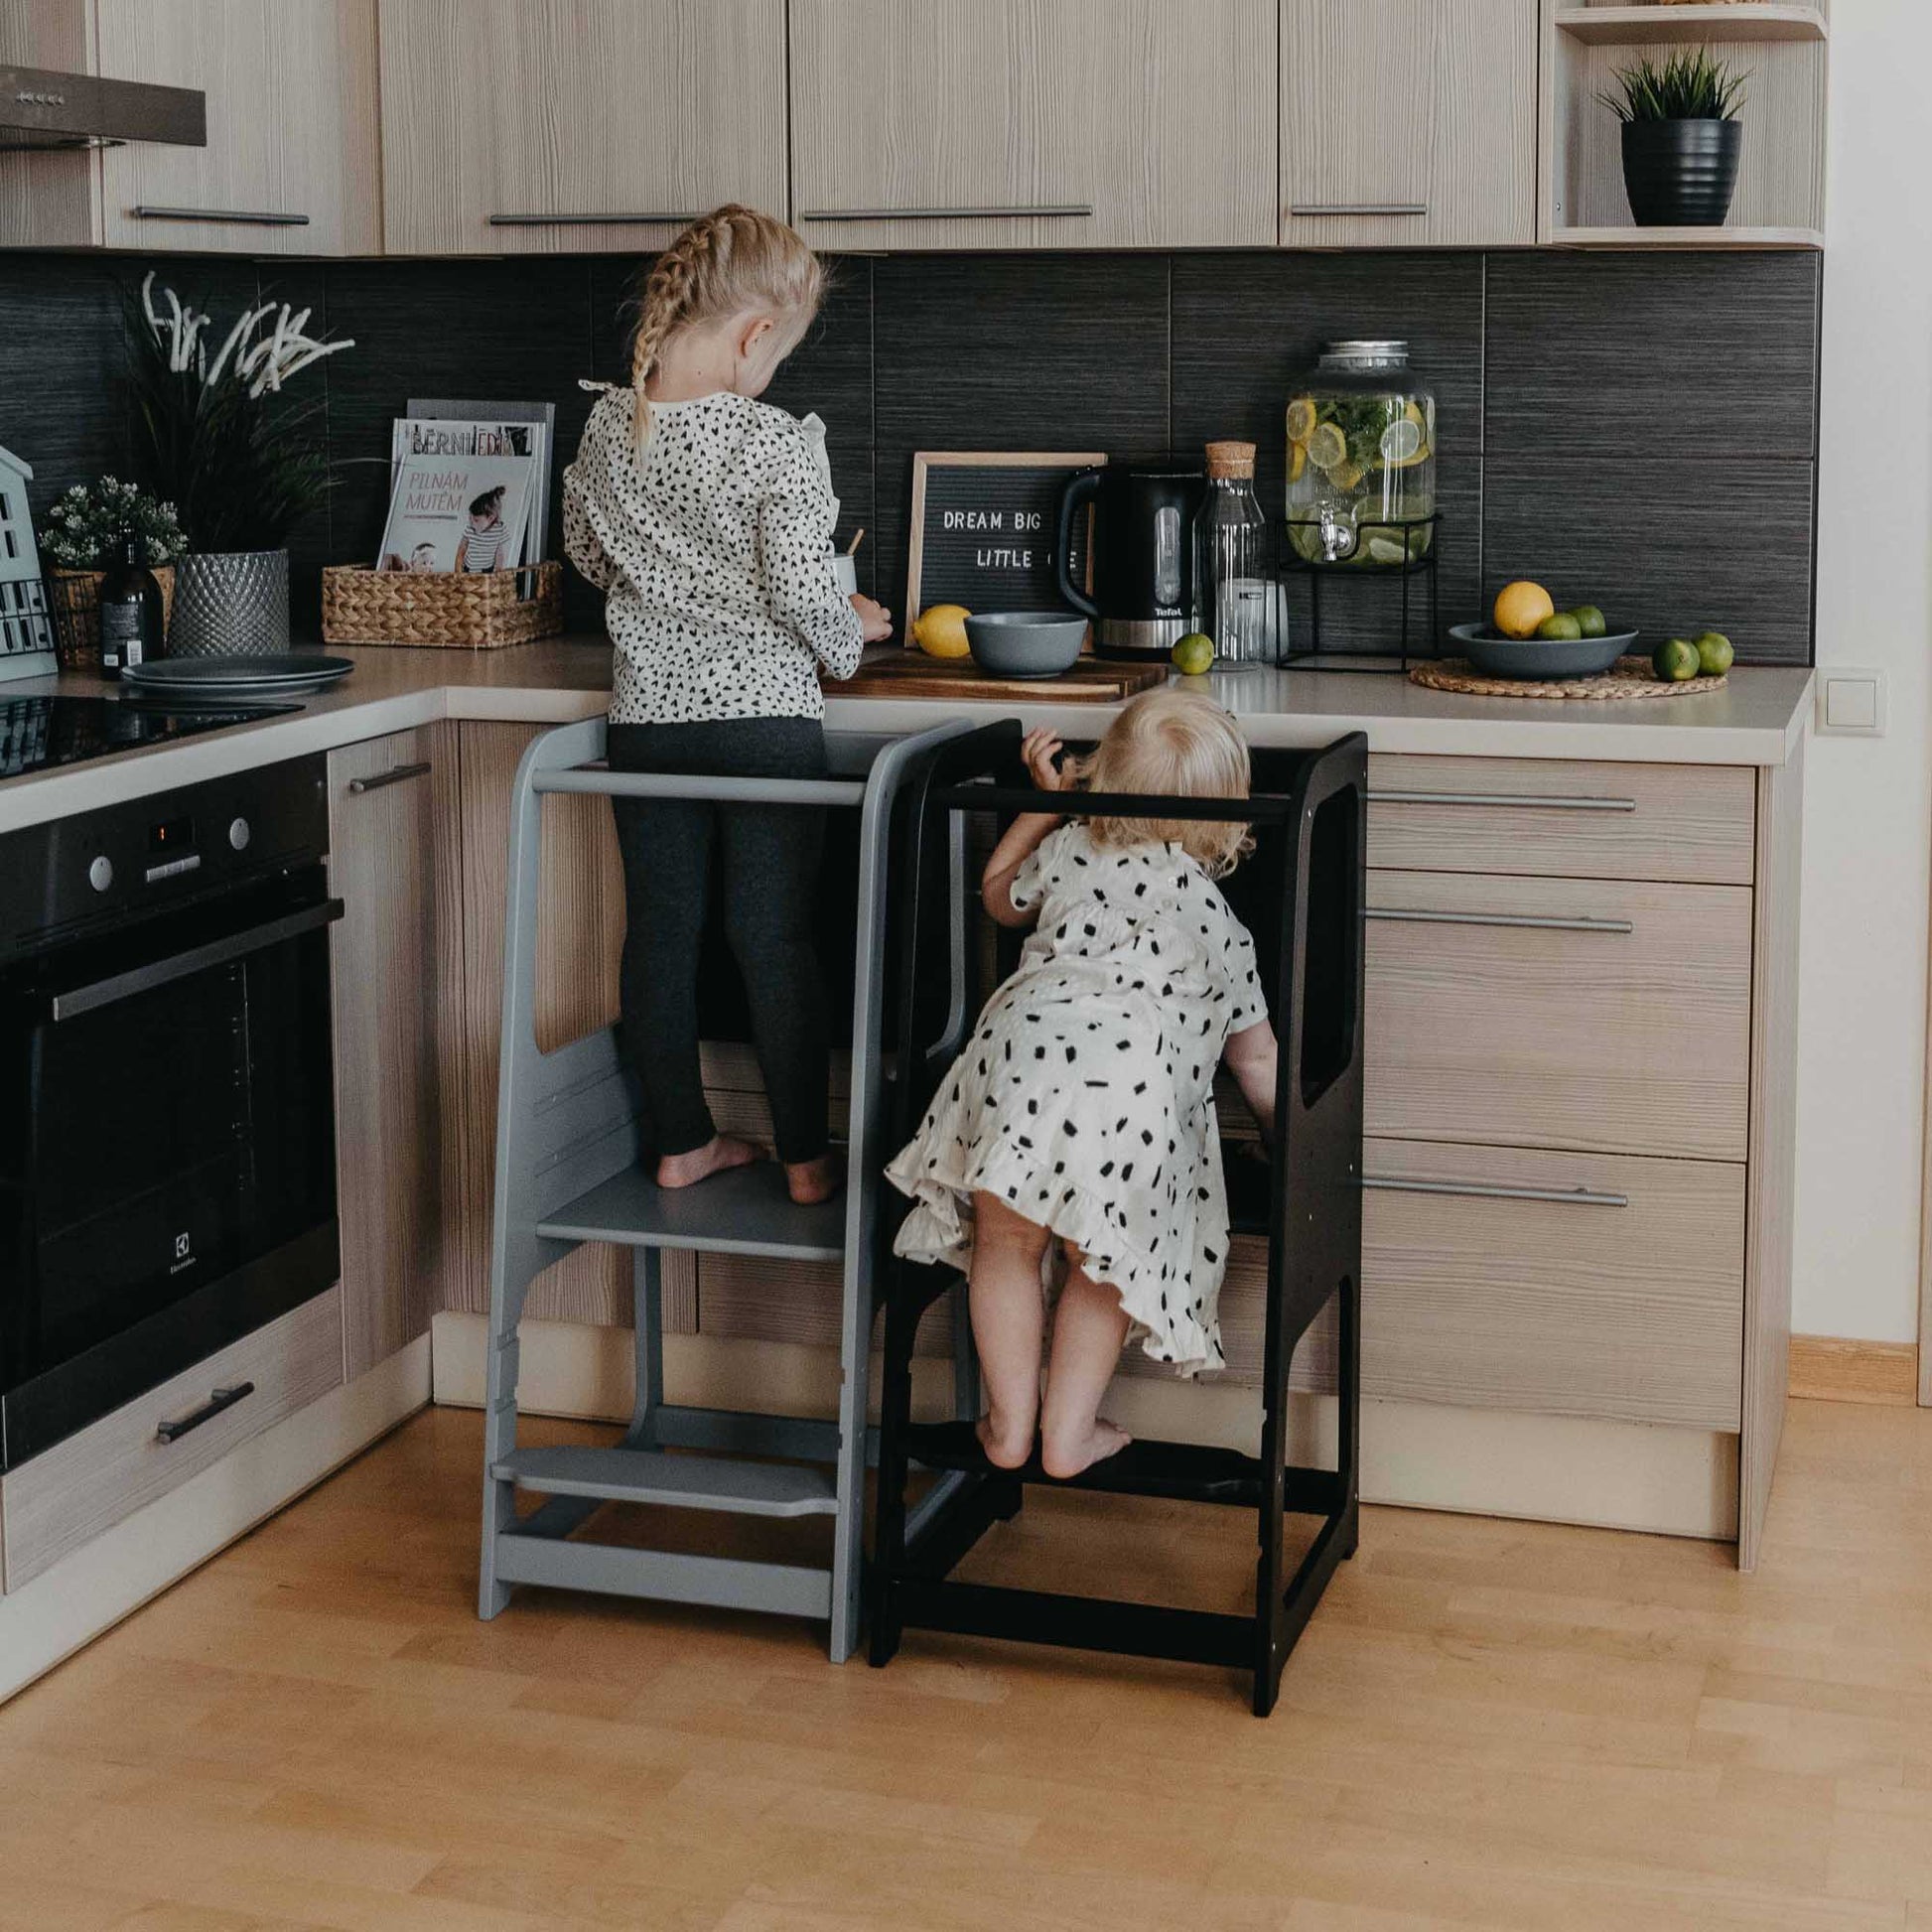 Kitchen tower with blackboard – Sweet HOME from wood